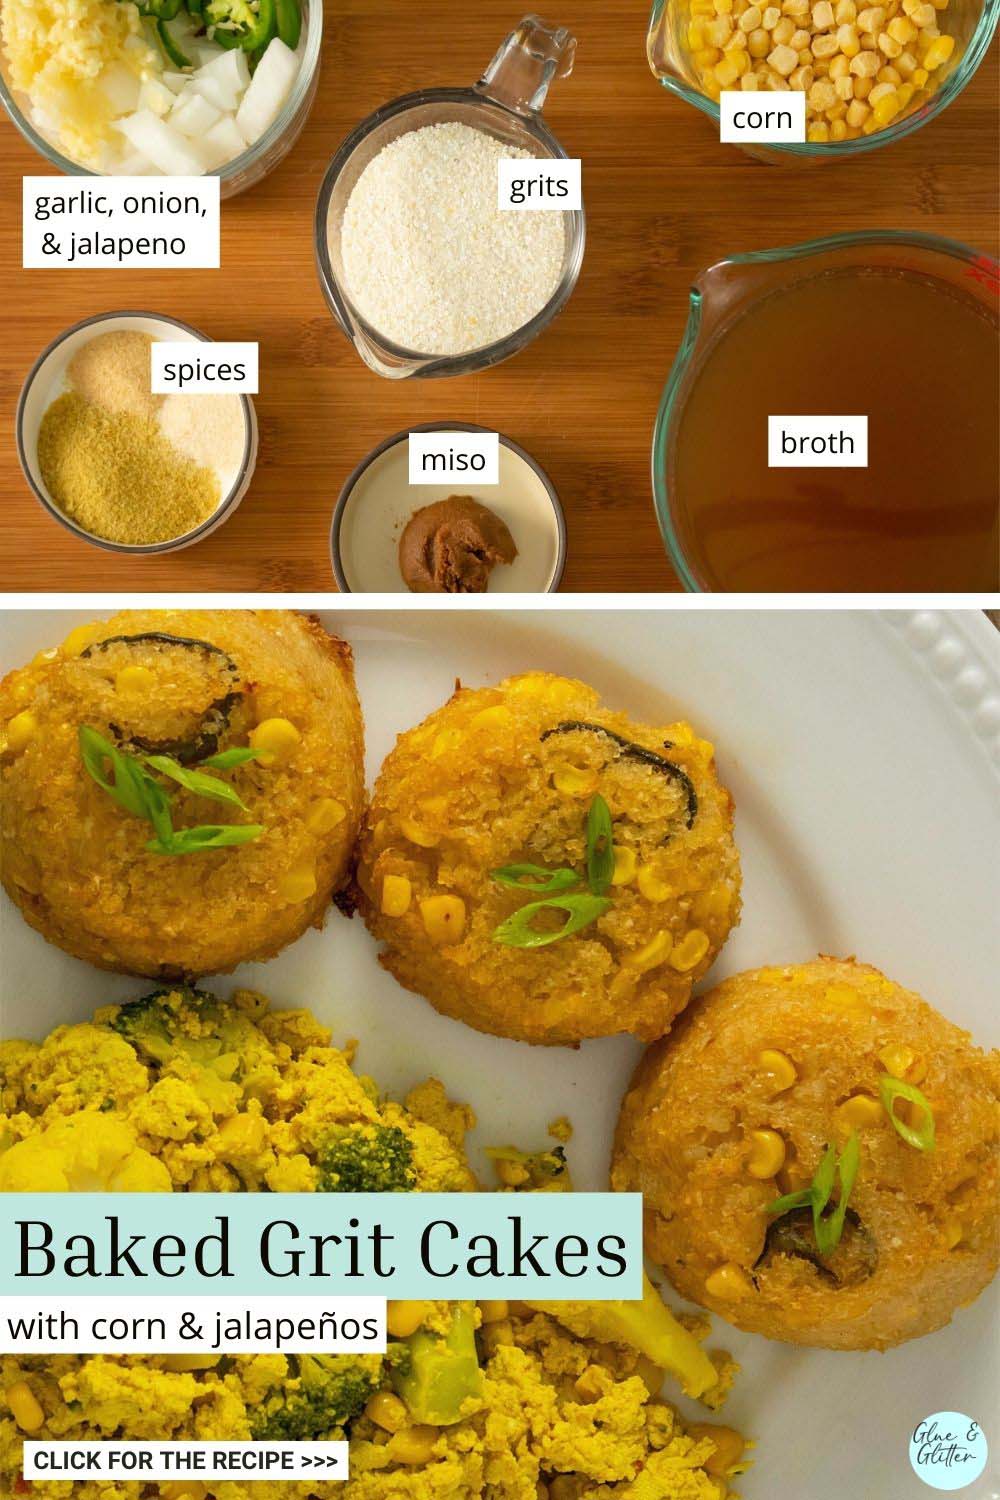 image collage showing grit cakes ingredients and the finished baked grit cakes on a plate with a tofu scramble